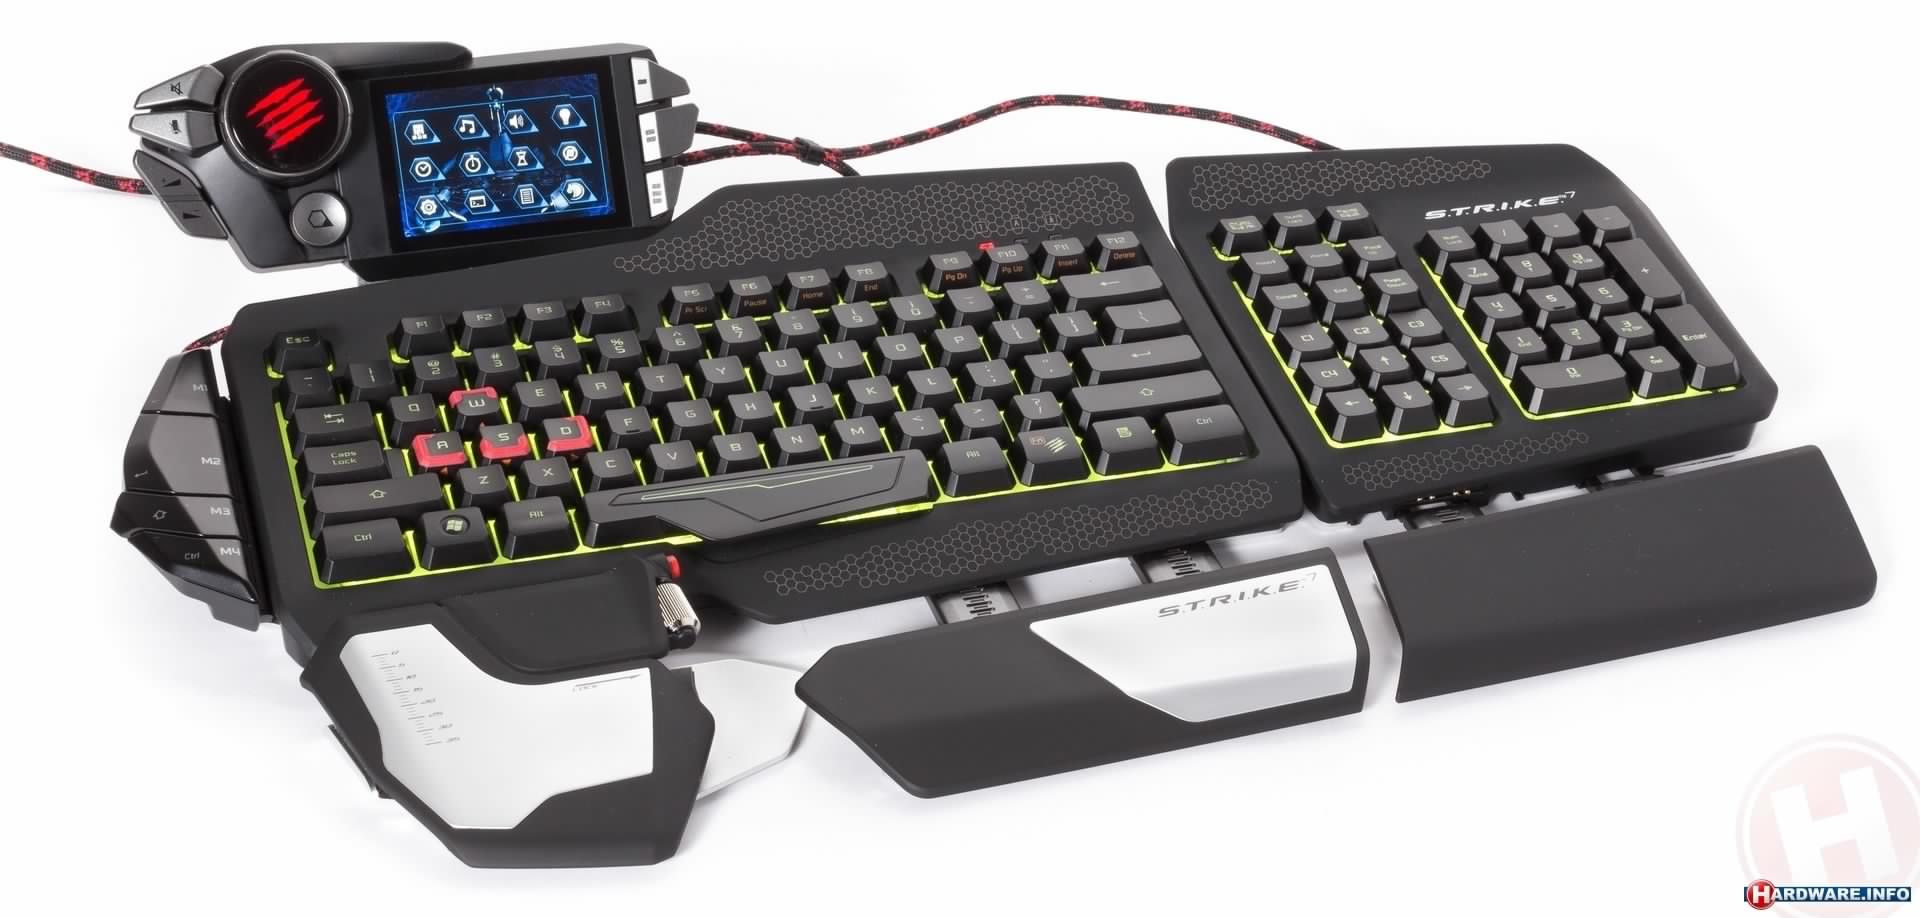 Image of the Mad Catz Strike 7 keyboard.